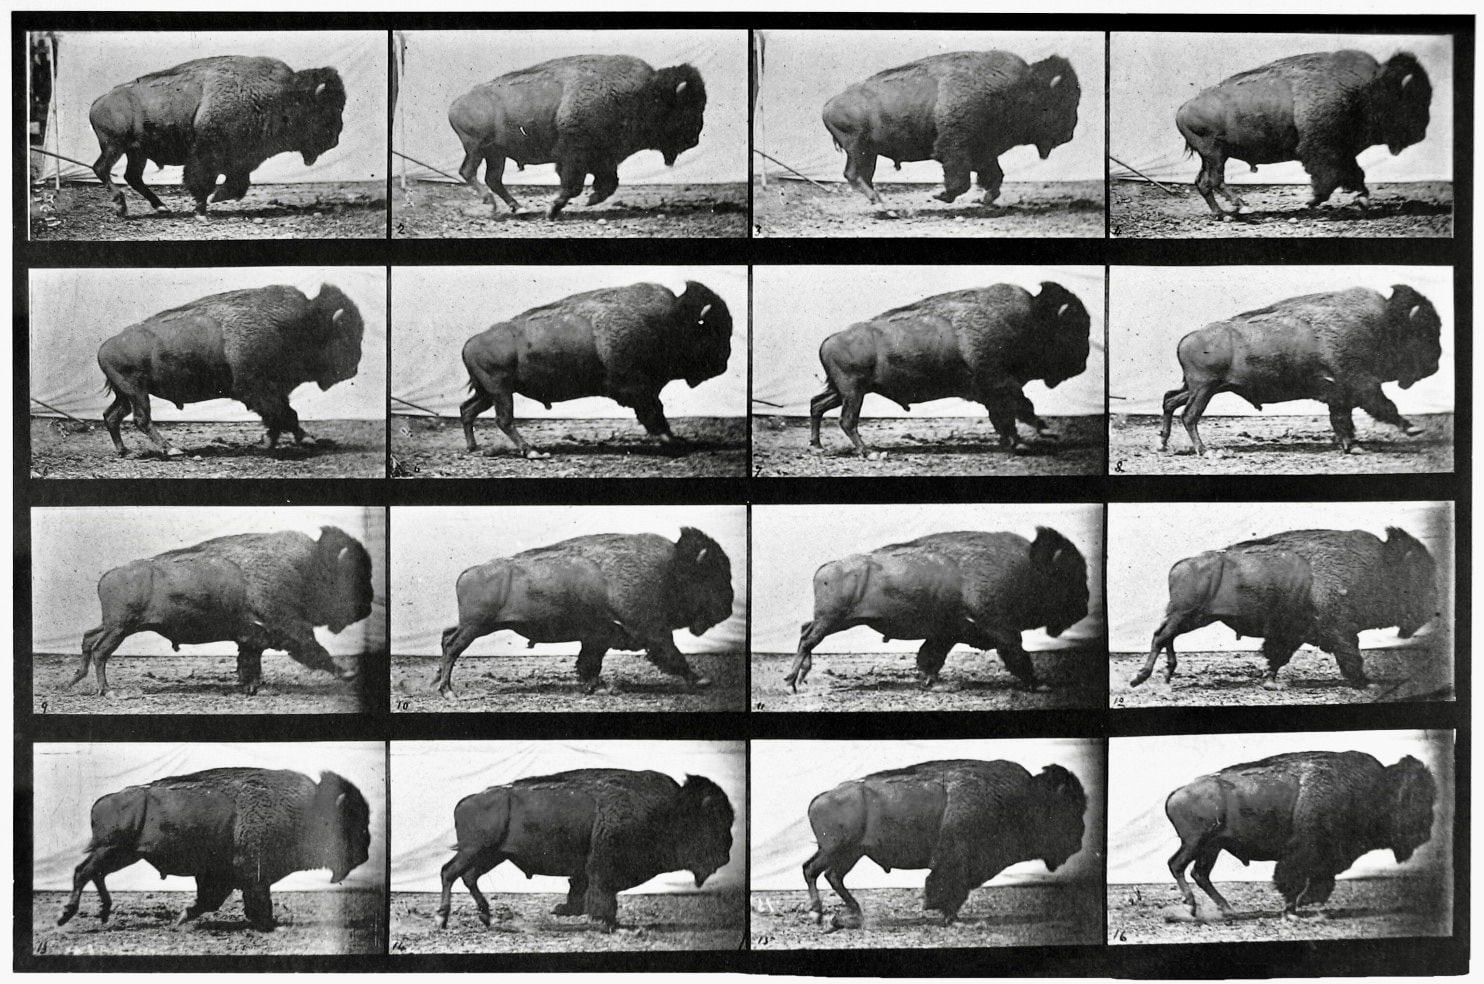 A collotype of assembled single-frame images titled "Buffalo, Galloping" (1887) by Edward Muybridge. Muybridge, a naturalist, was a pioneer of "motion pictures" that could show animation and animal movement by projecting photographic stills together.  This piece can be viewed at the Iris and B. Gerald Cantor Center for Visual Arts, Stanford, University